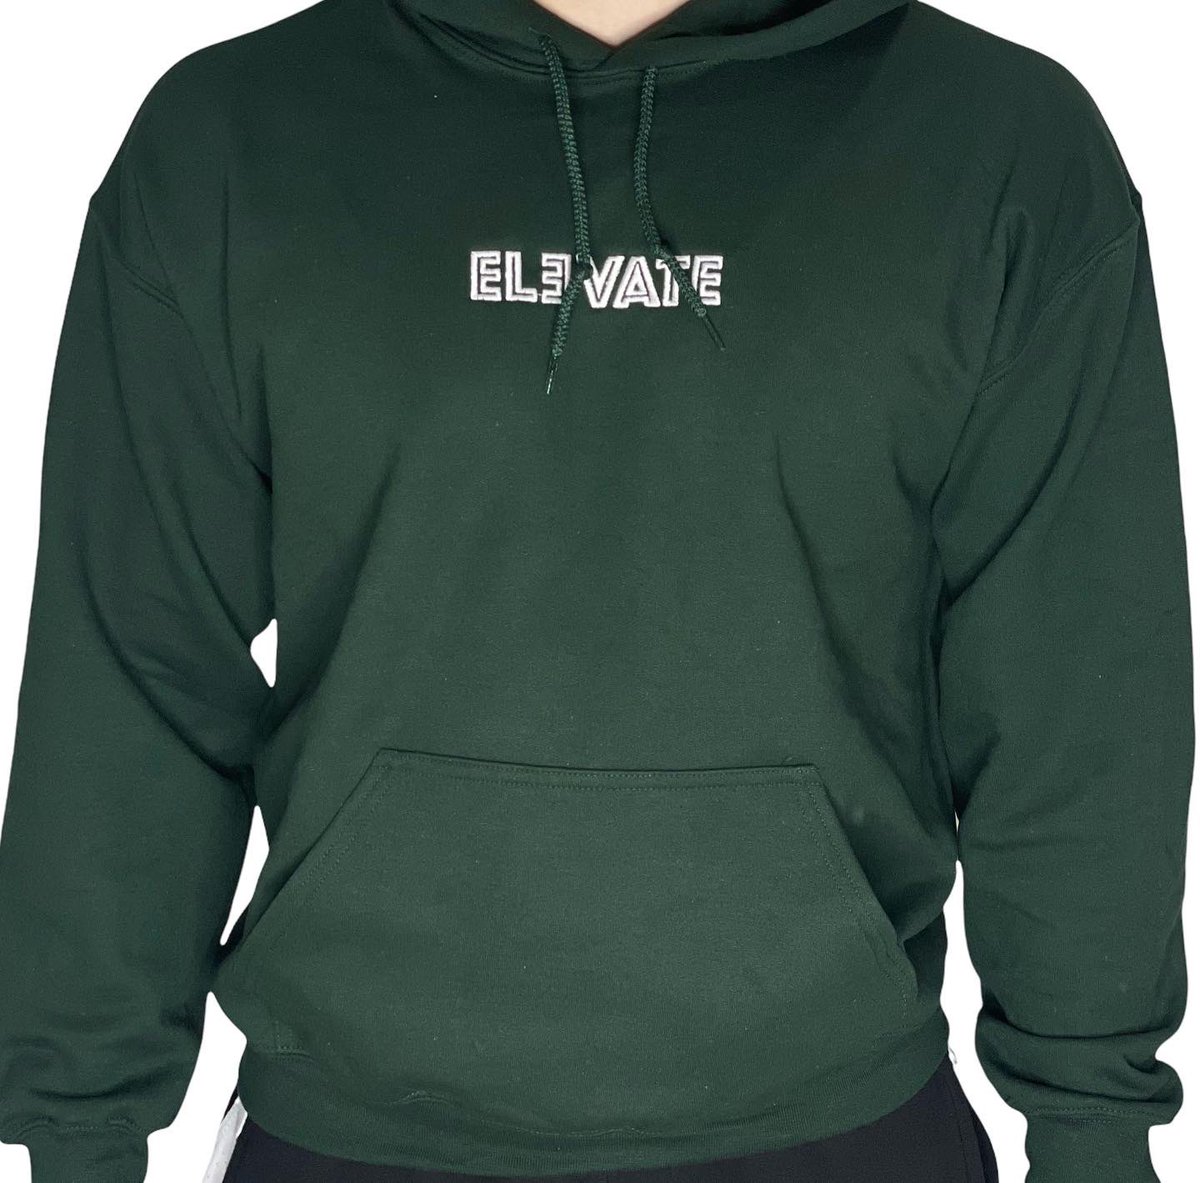 🚨NEW DROP!🚨

Introducing our newest drop, the EL3VATE Hooded Sweatshirts.

Available in 3 colors. Be sure to add these to your collection.

Link to website is in our bio 
#taptoshop #shop #localbusiness #fashion